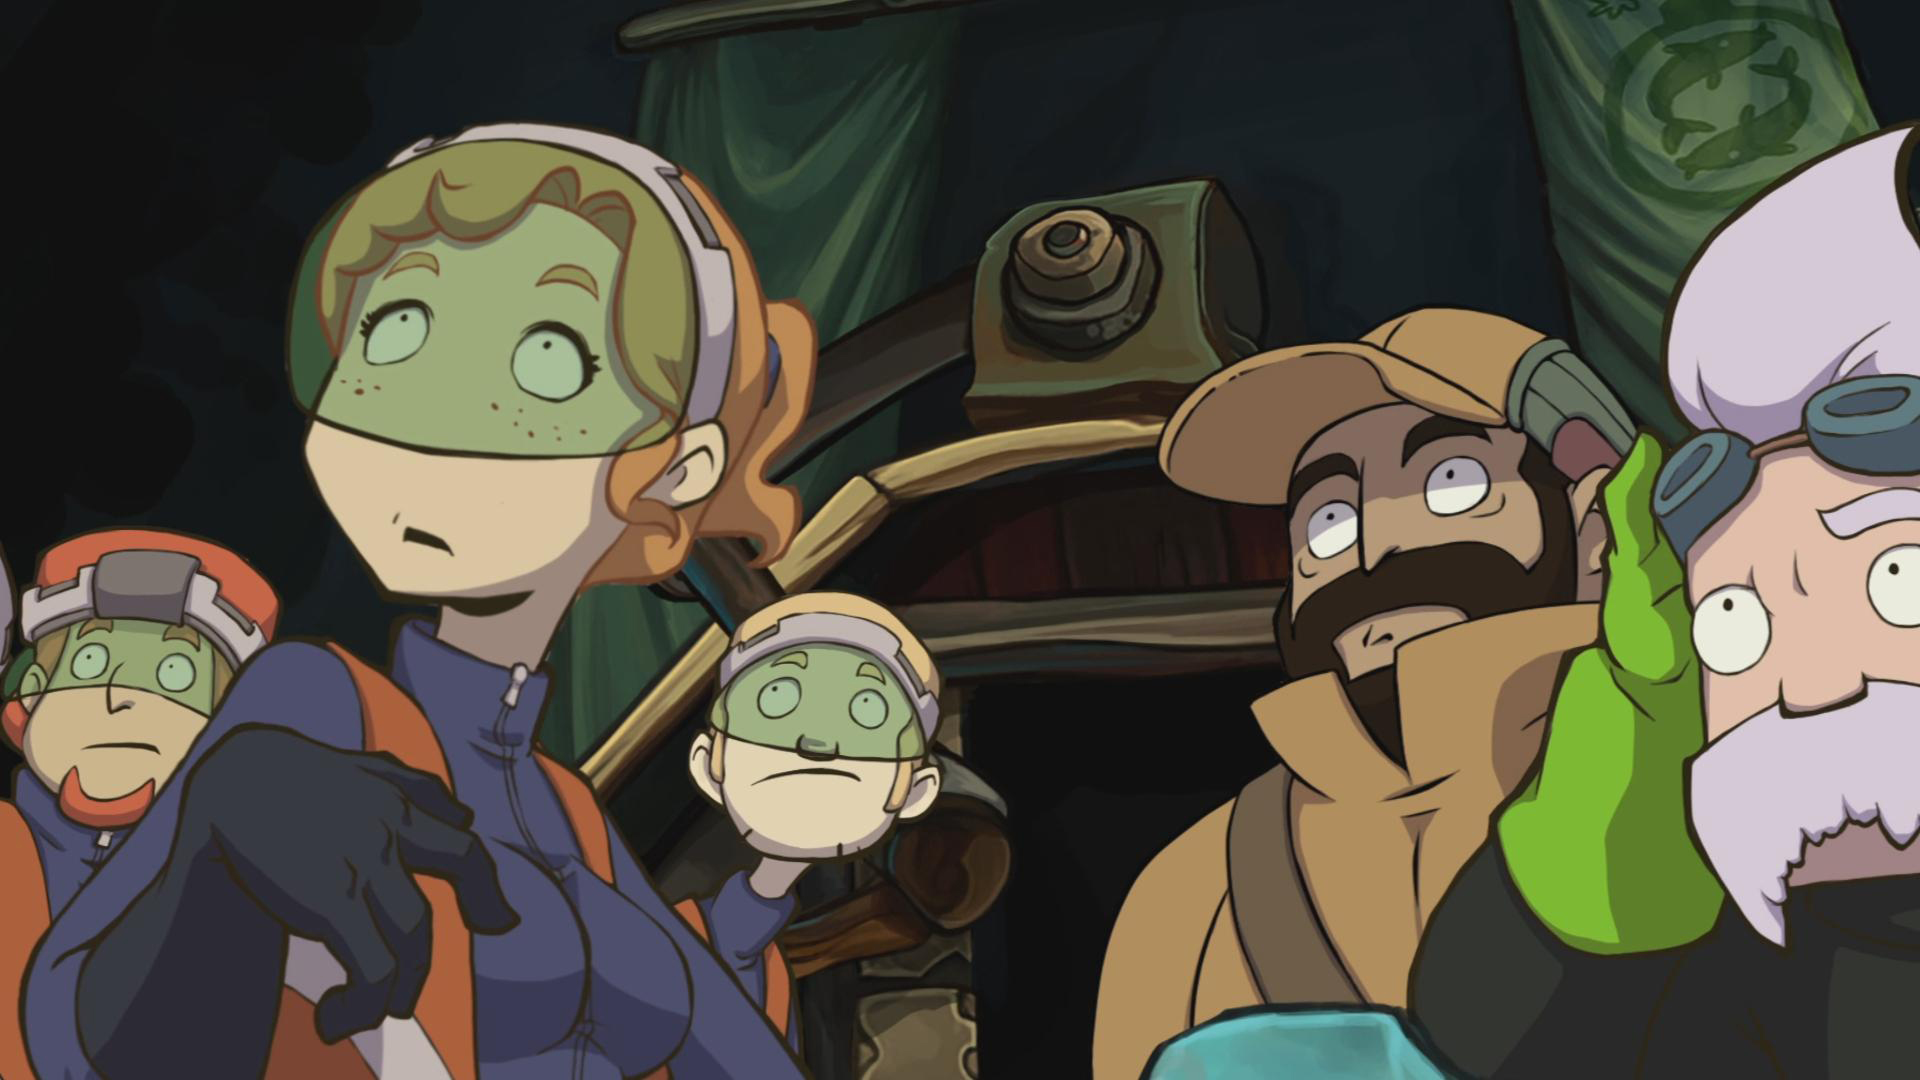 deponia game play